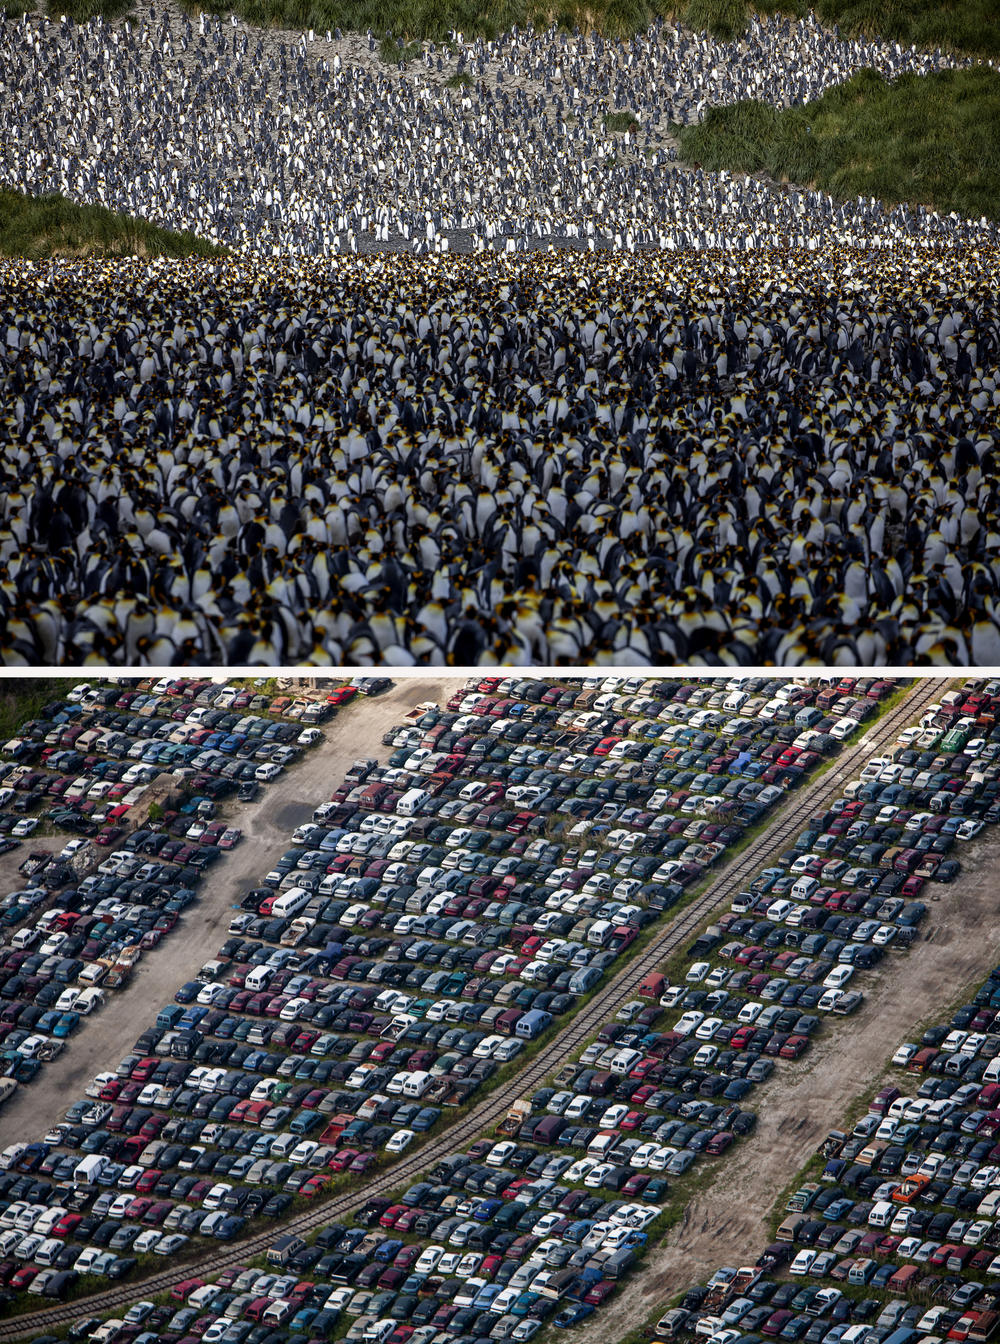 (Top image) A king penguin colony on the South Georgia Island's in February 2022. Scientists warn that, in the future, warming oceans and commercial fishing could negatively affect the penguins' food sources. (Bottom image) An aerial photo of thousands of cars flooded by Hurricane Katrina near New Orleans in April 2007.